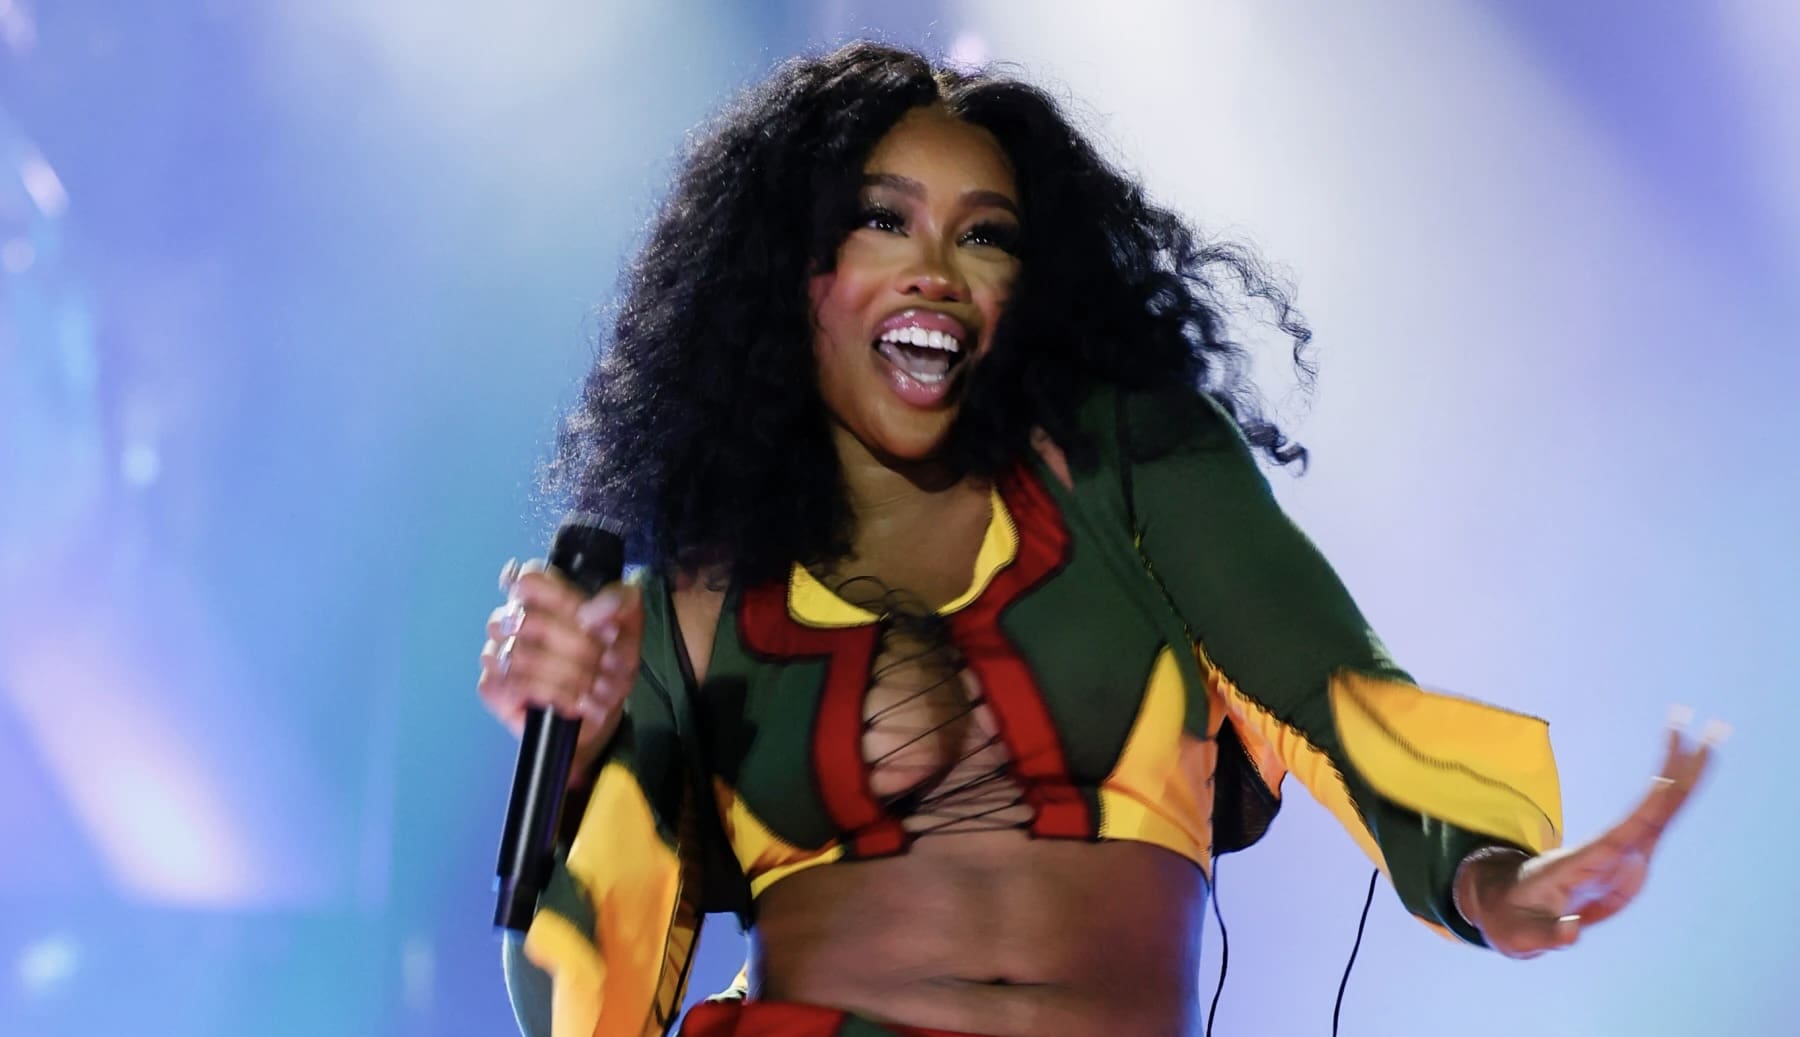 SZA’s ‘Kill Bill’ Has Landed The Singer Her First No. 1 On The ‘Billboard’ Hot 100 Chart